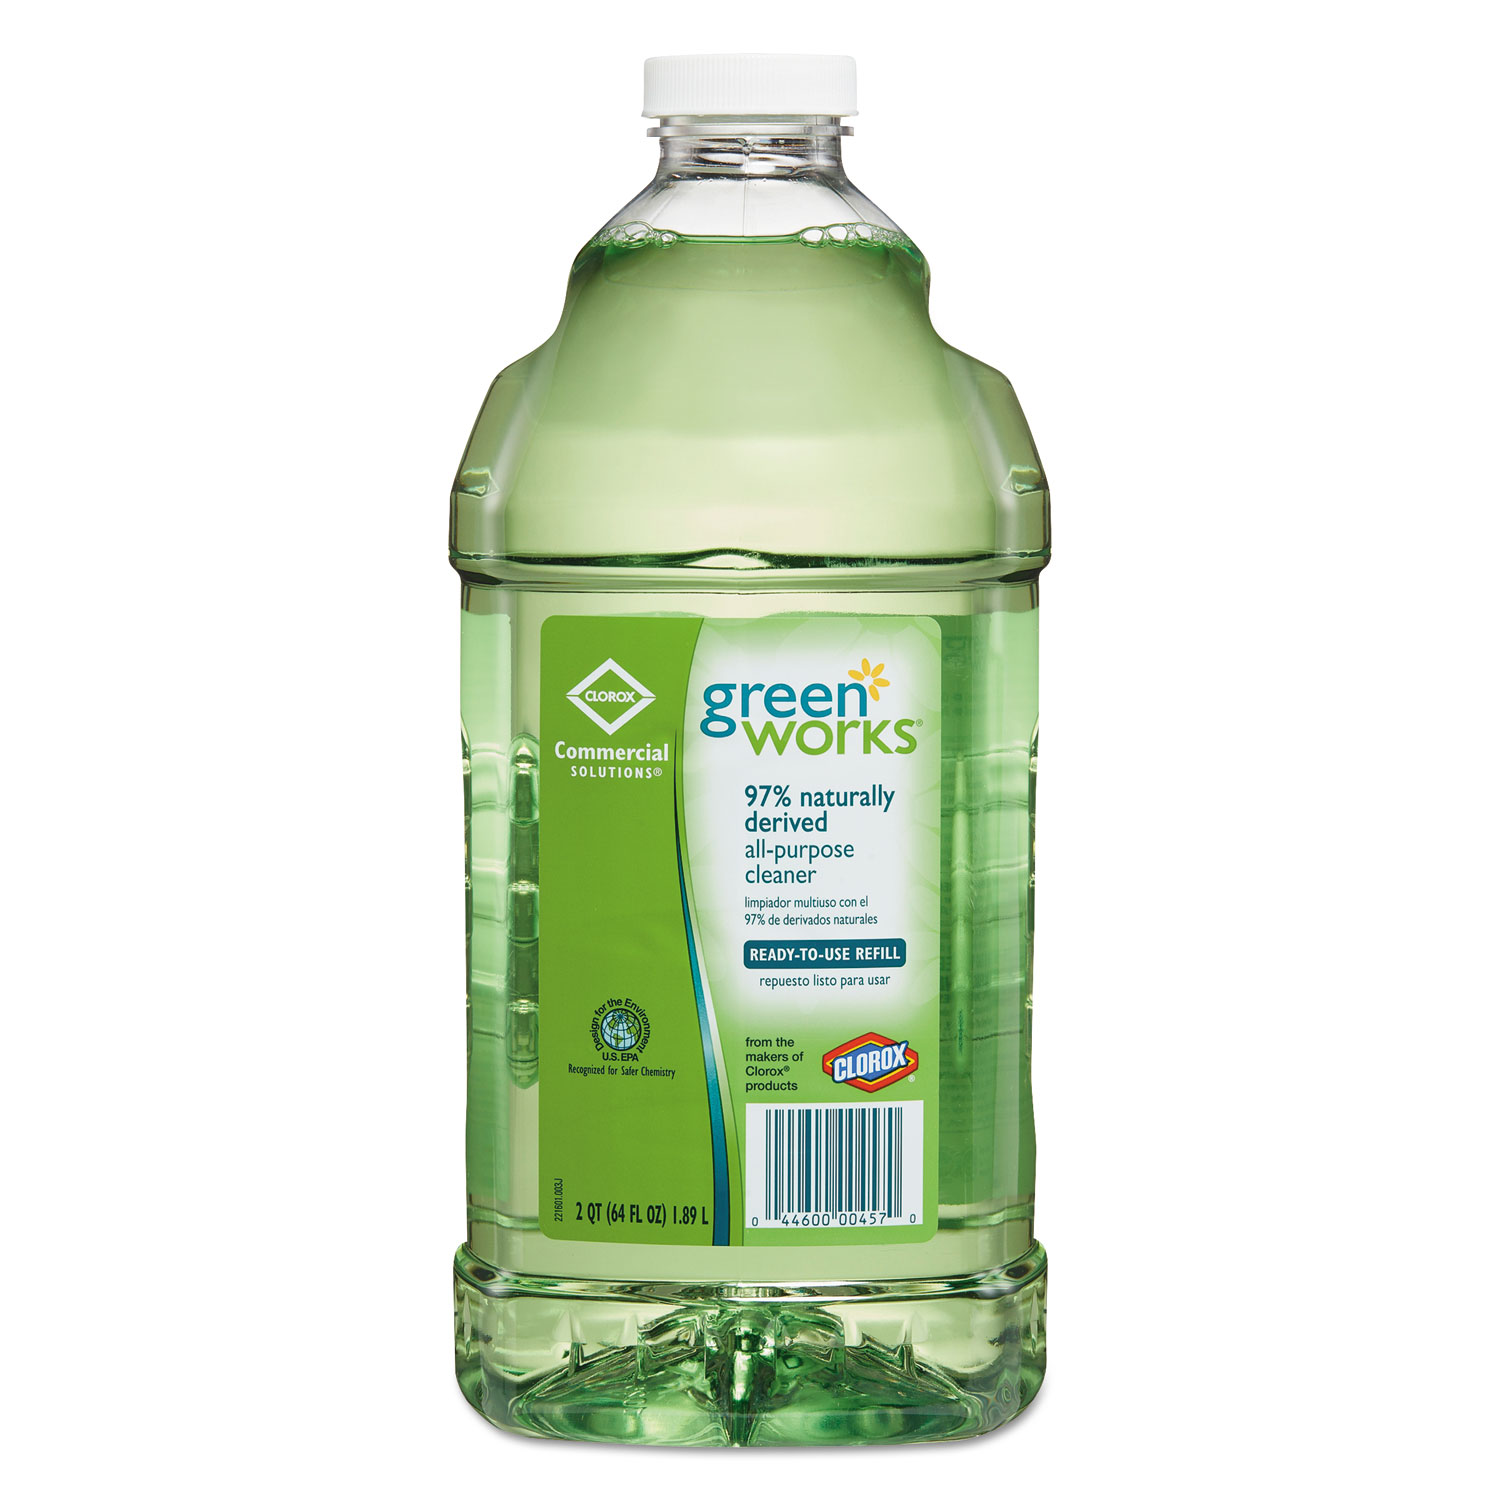  Green Works 10044600004577 All-Purpose and Multi-Surface Cleaner, Original, 64oz Refill (CLO00457) 